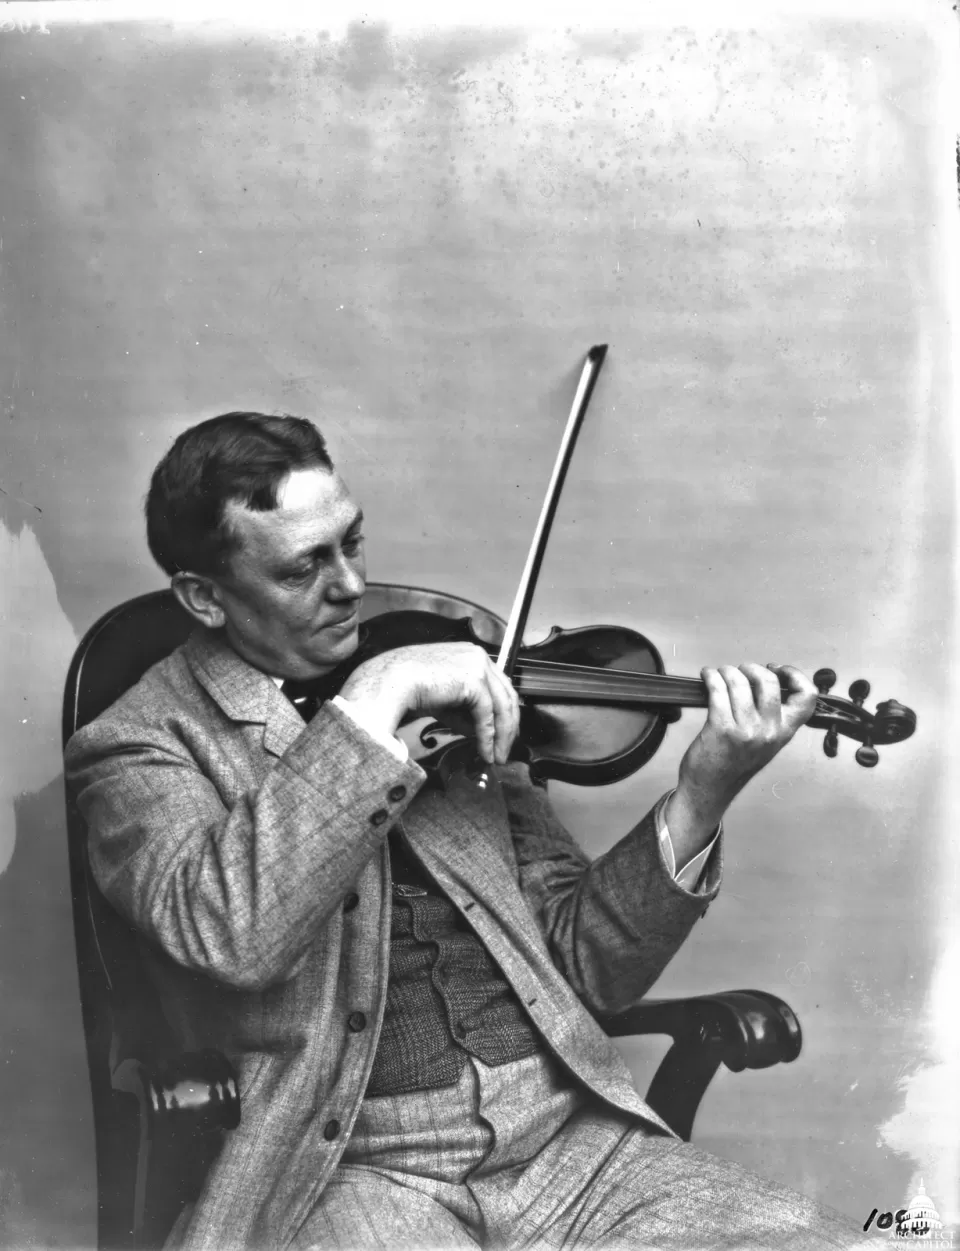 Elliott Woods, 6th Architect of the Capitol, playing the violin.